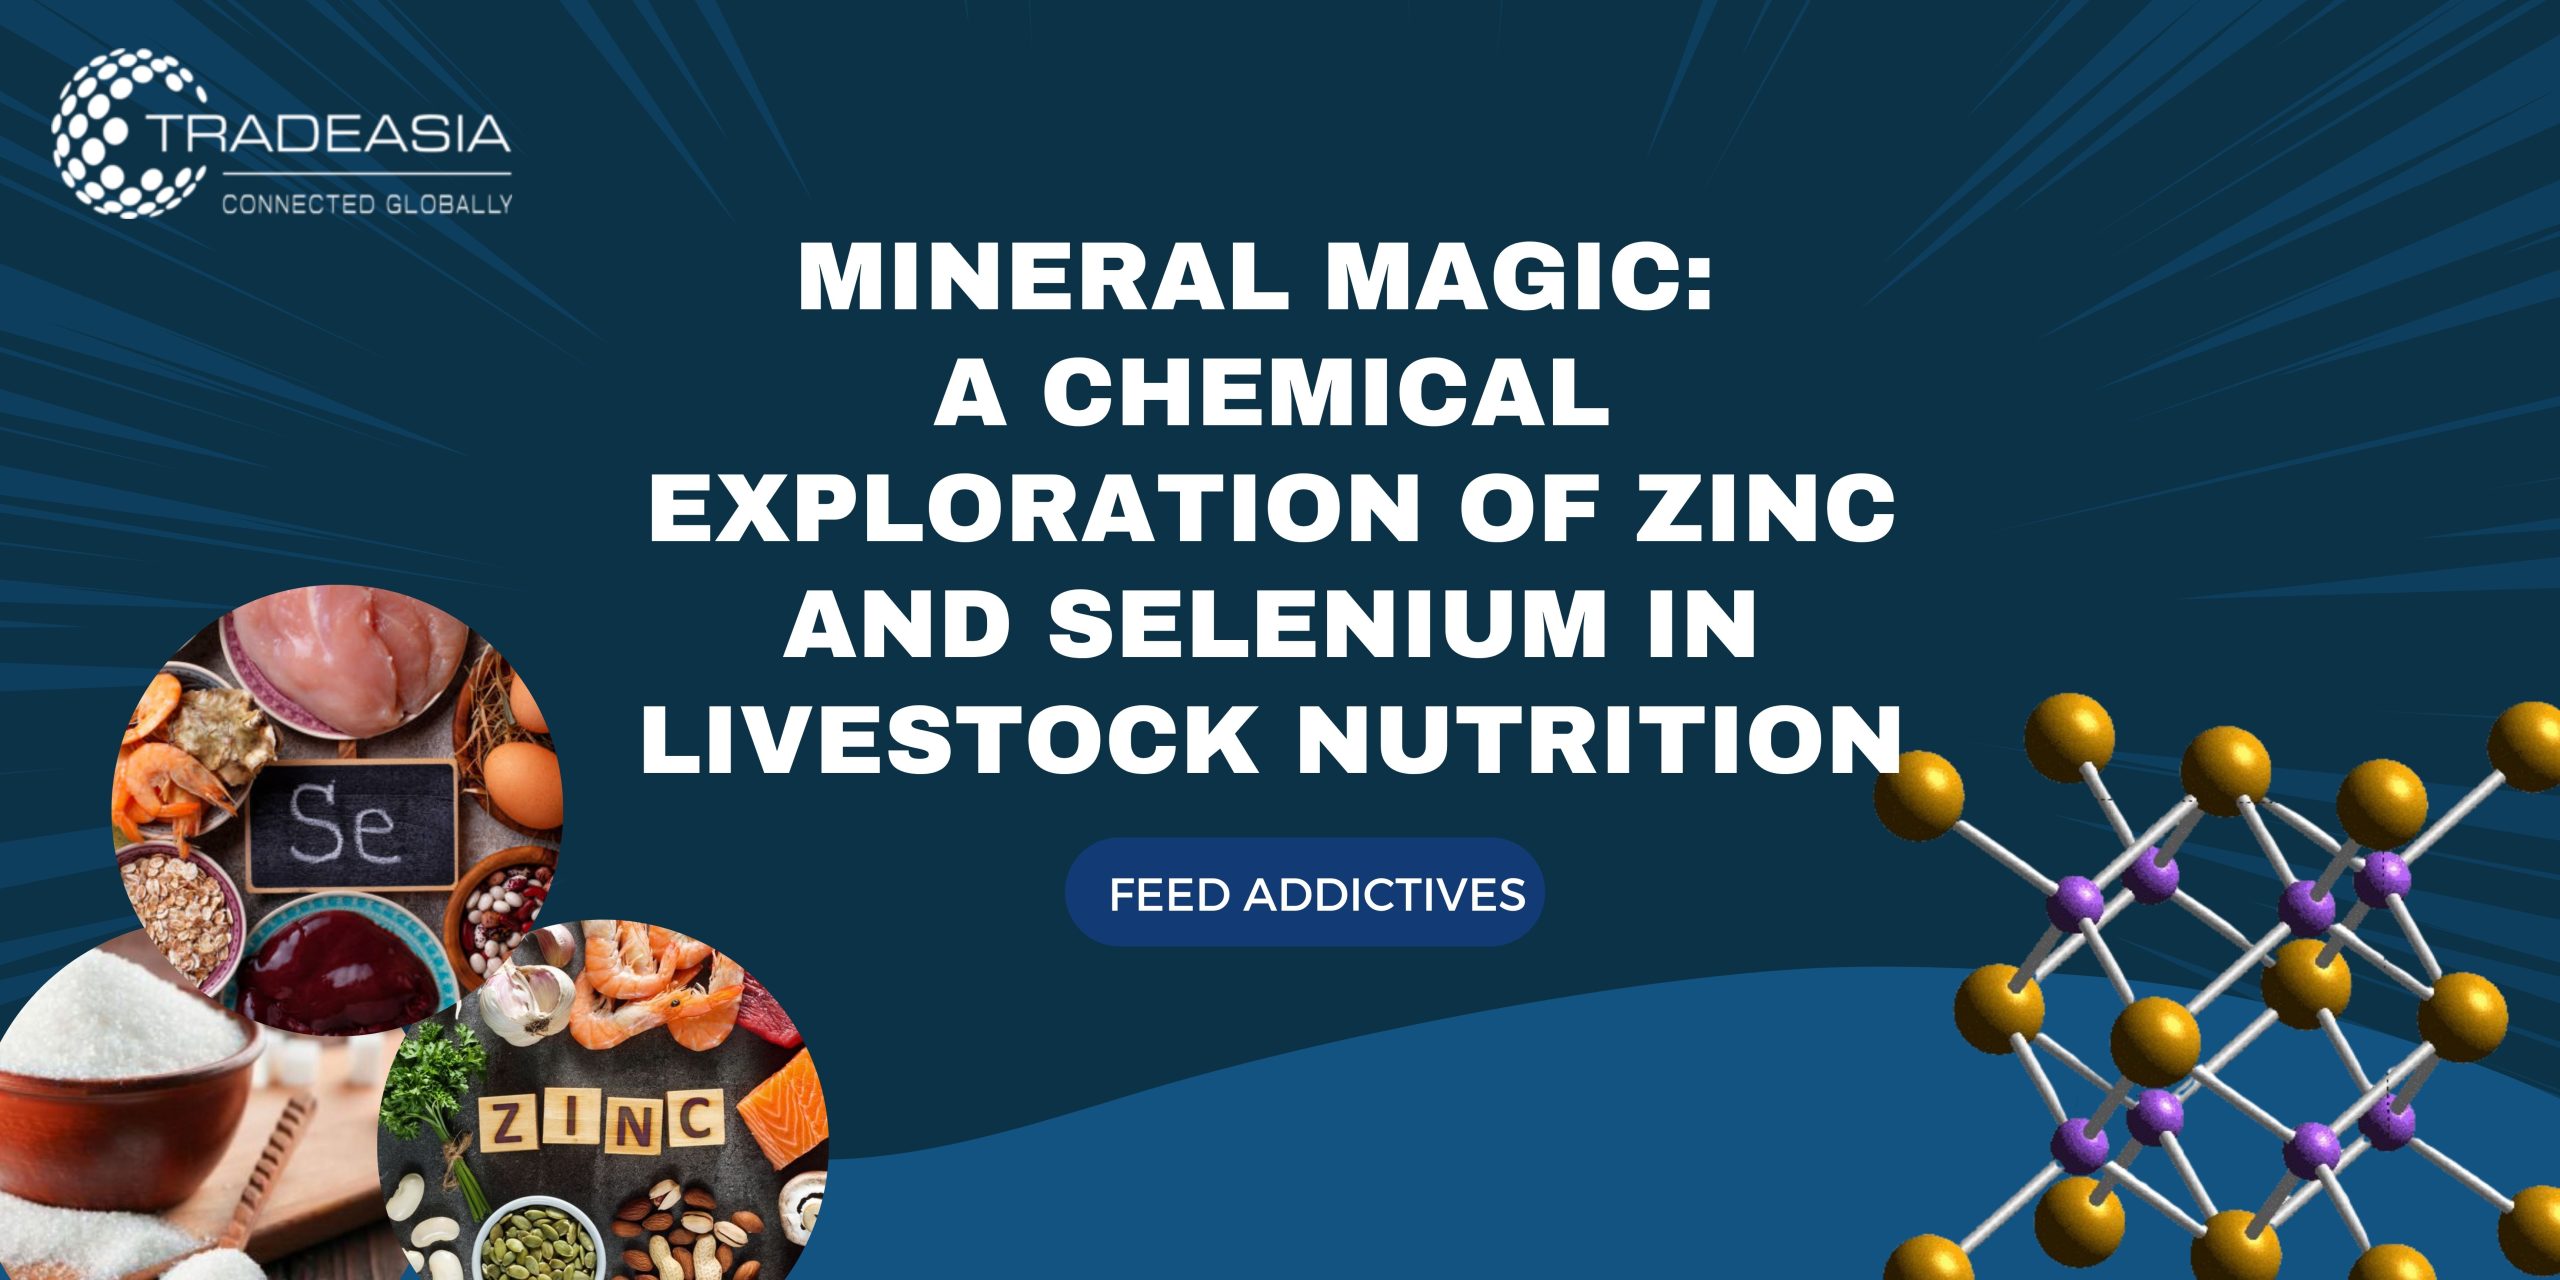 Mineral Magic: A Chemical Exploration of Zinc and Selenium in Livestock Nutrition